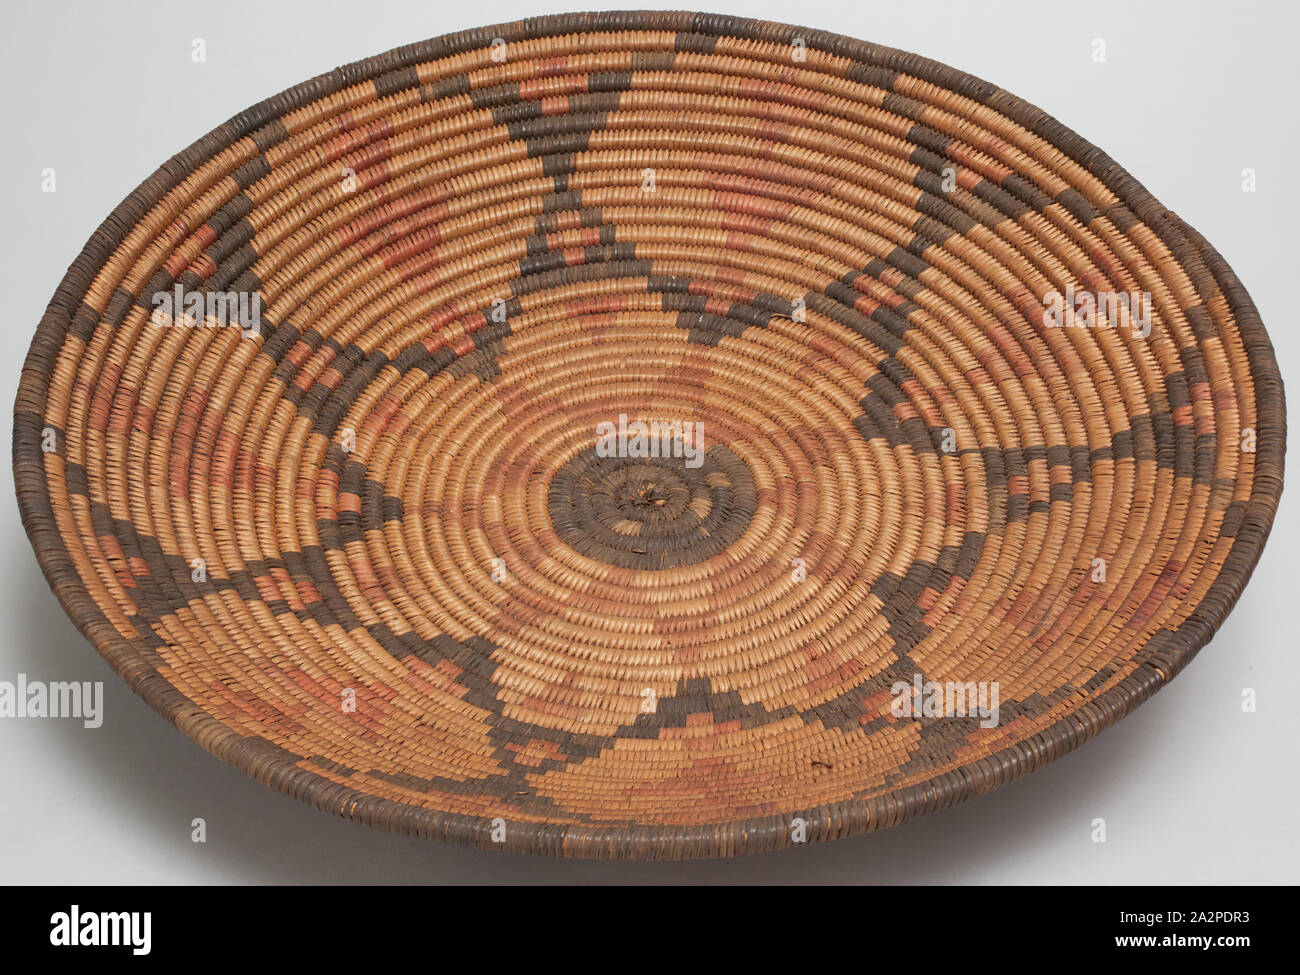 Apache, Native American, Basket, 19th century, willow and devil's claw (martynia), Overall: 2 7/8 × 13 3/8 inches (7.3 × 34 cm Stock Photo